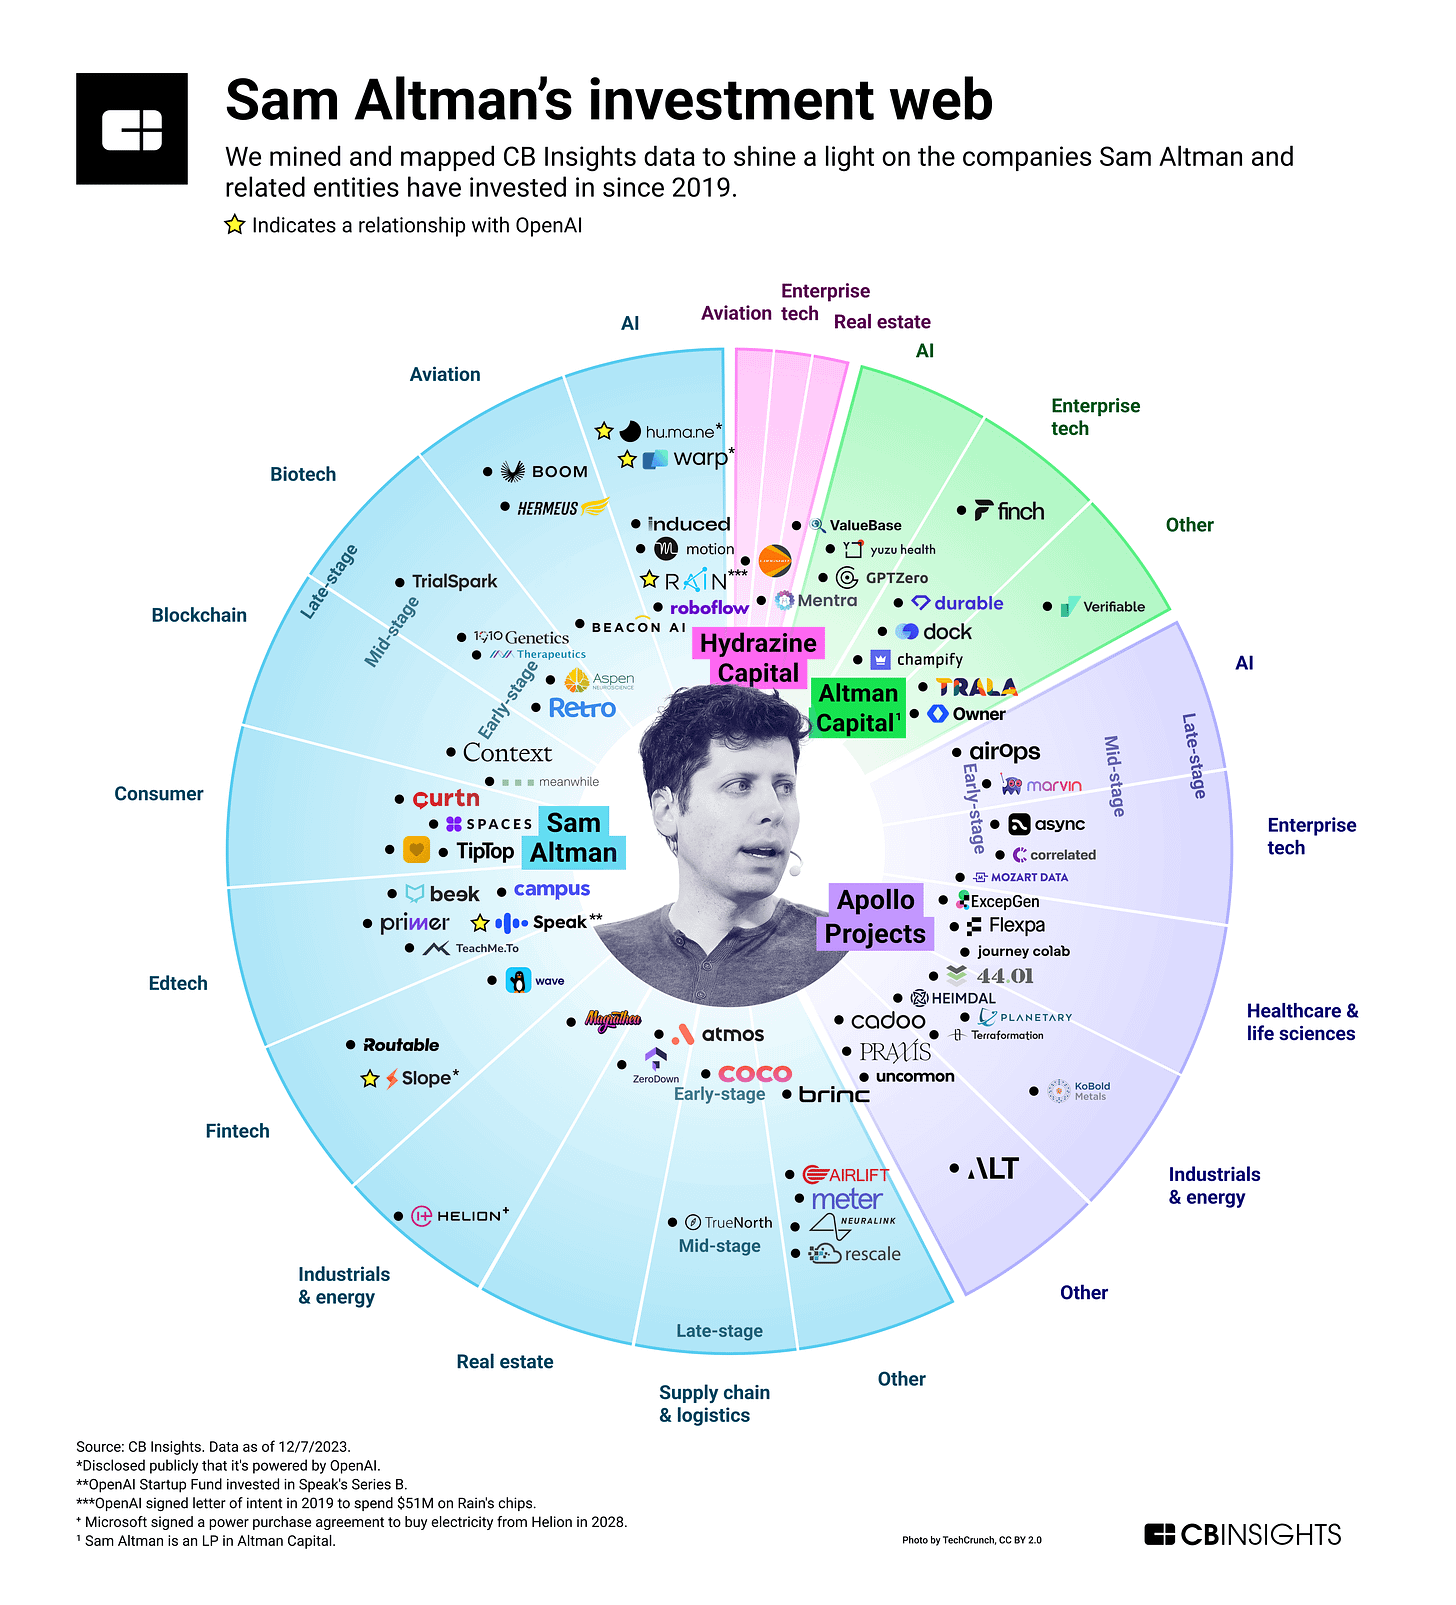 Sam Altman's Investment Web: Where the OpenAI CEO is investing in AI,  biotech, energy, and more - CB Insights Research